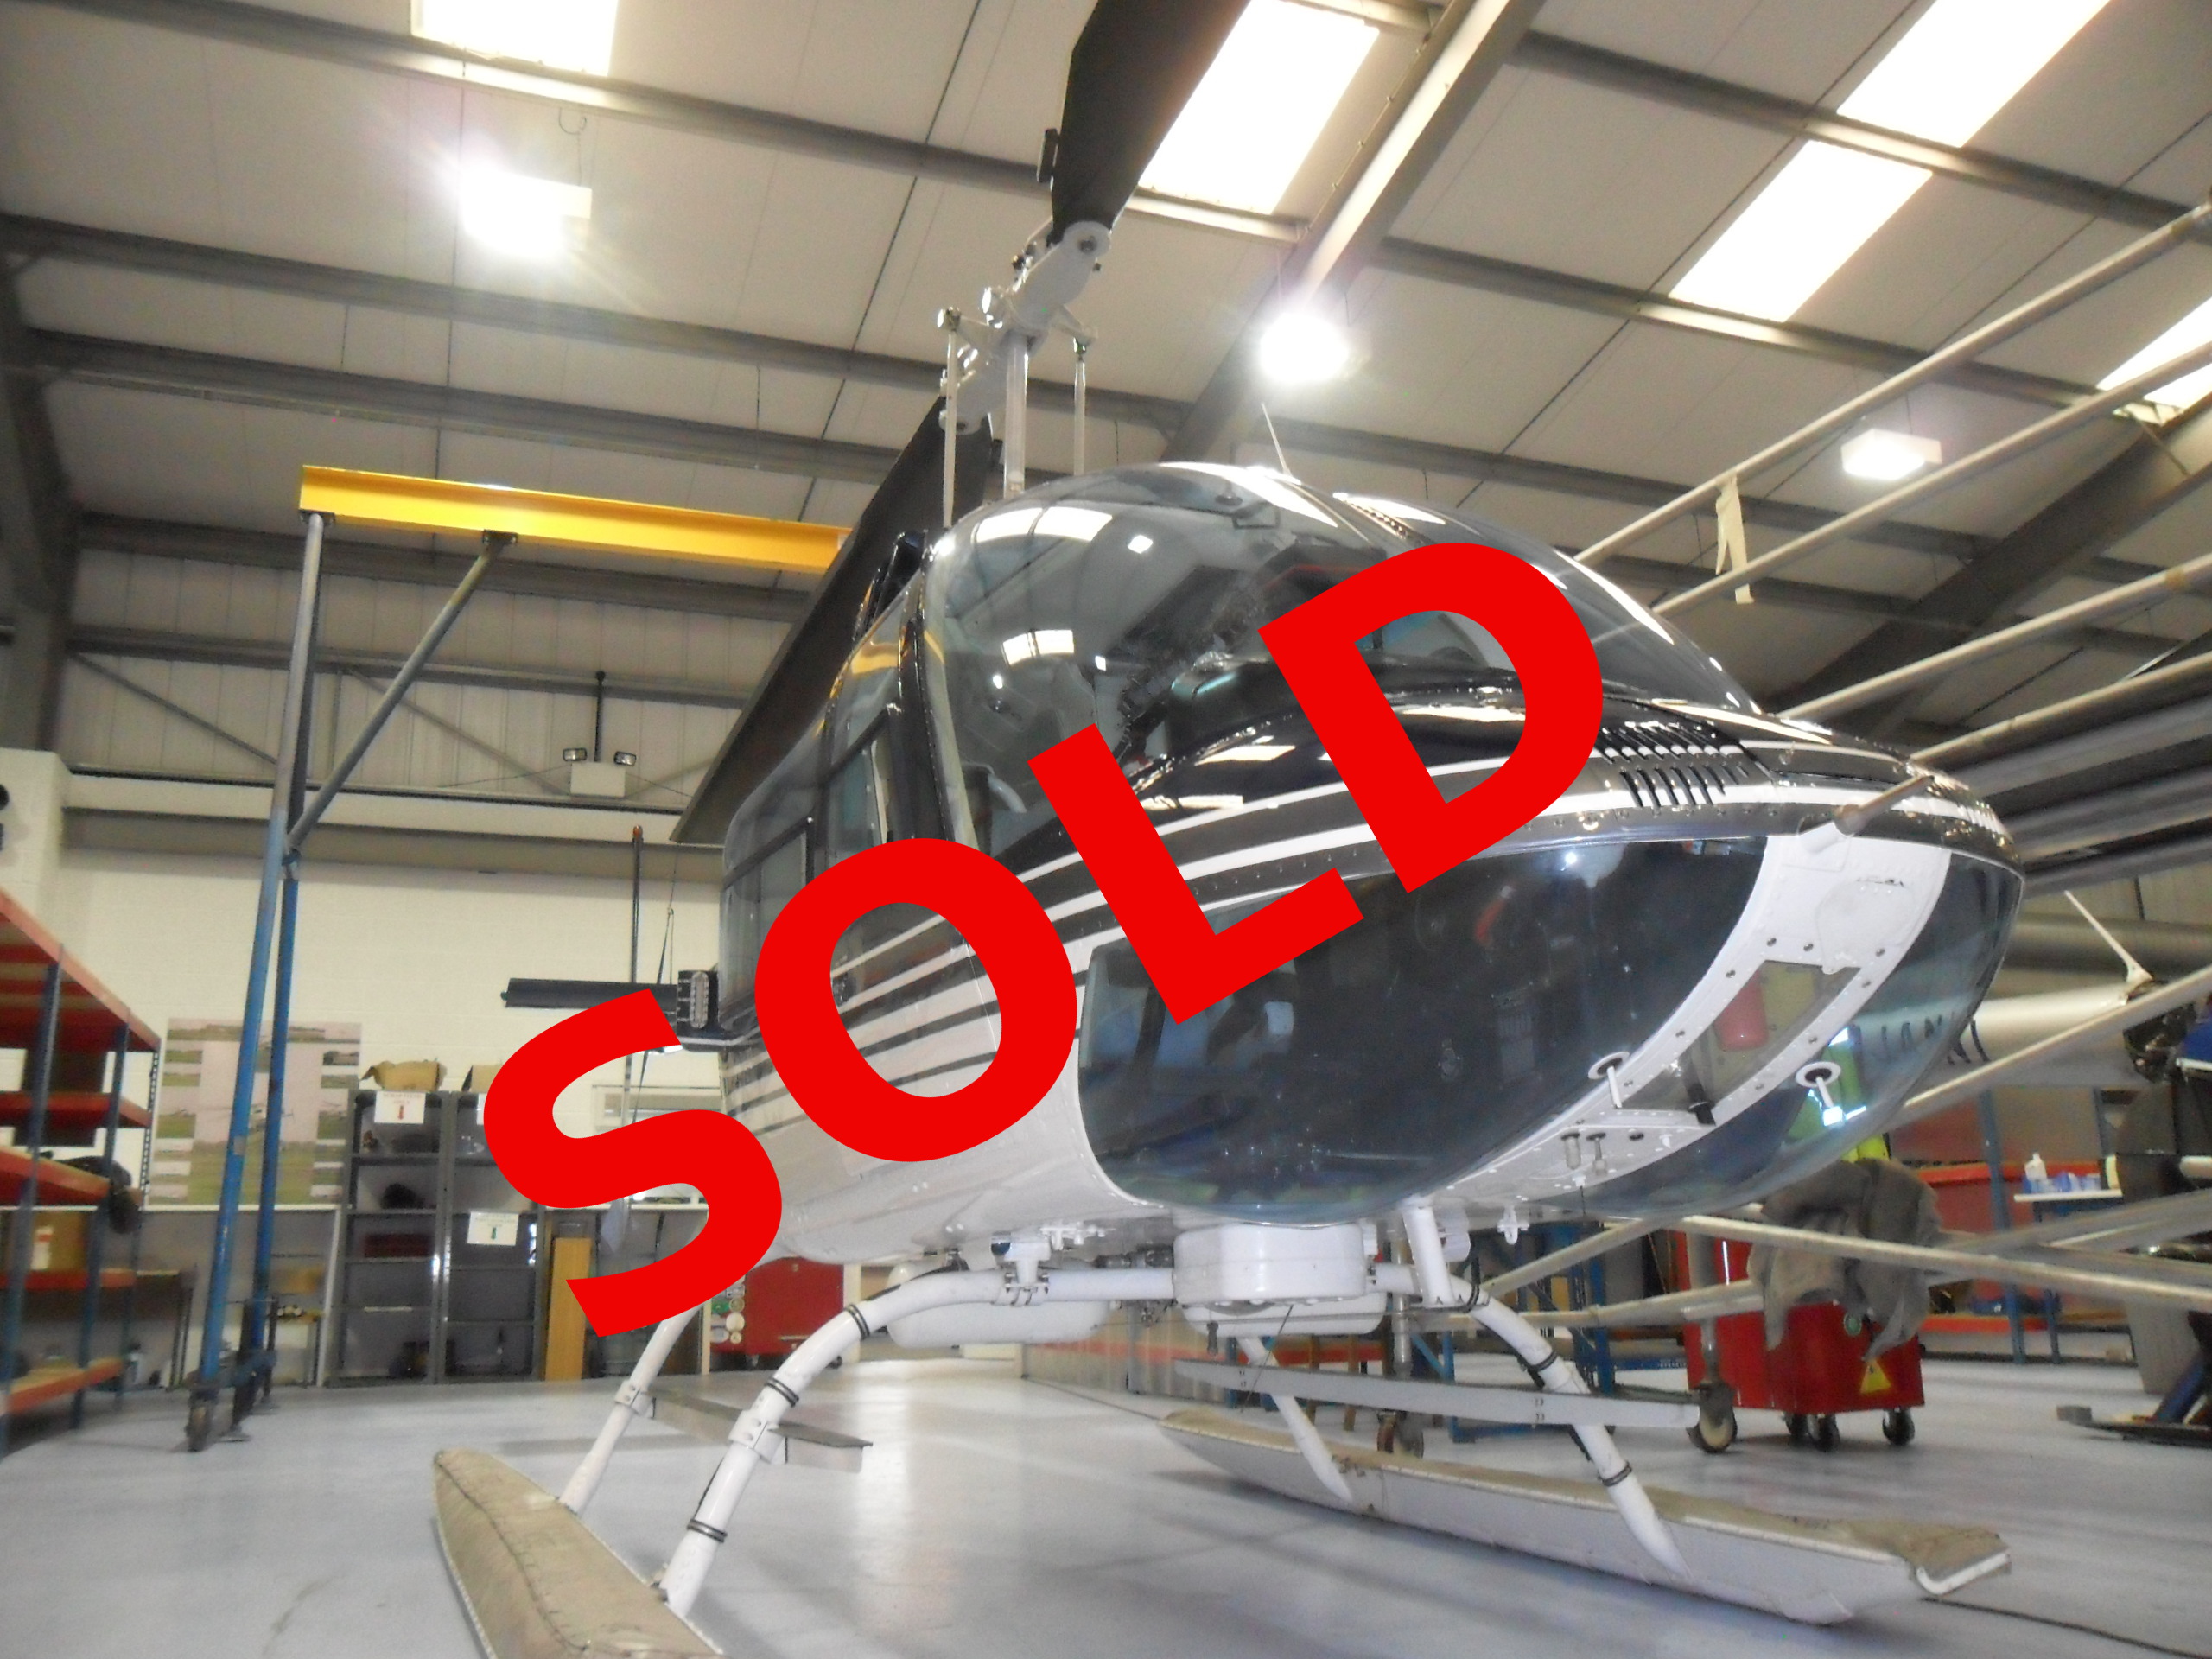 Helicopter flight training and sales in Shoreham, Sussex, UK